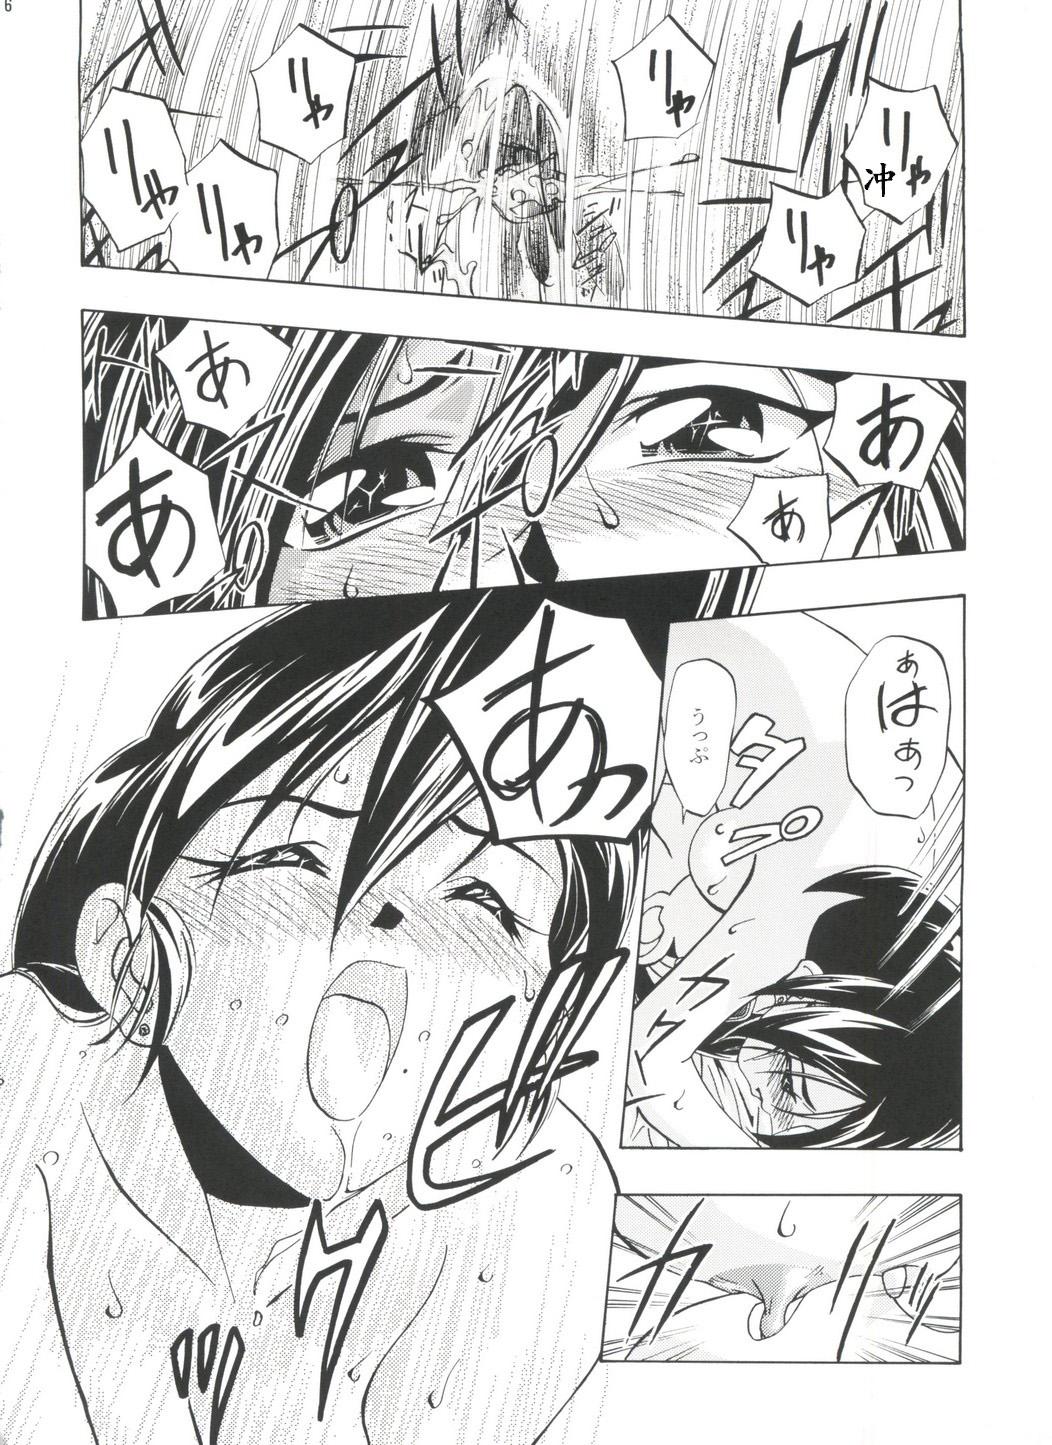 Chacal Taiketsu! Go VS Fighter! - Bakusou kyoudai lets and go Picked Up - Page 10